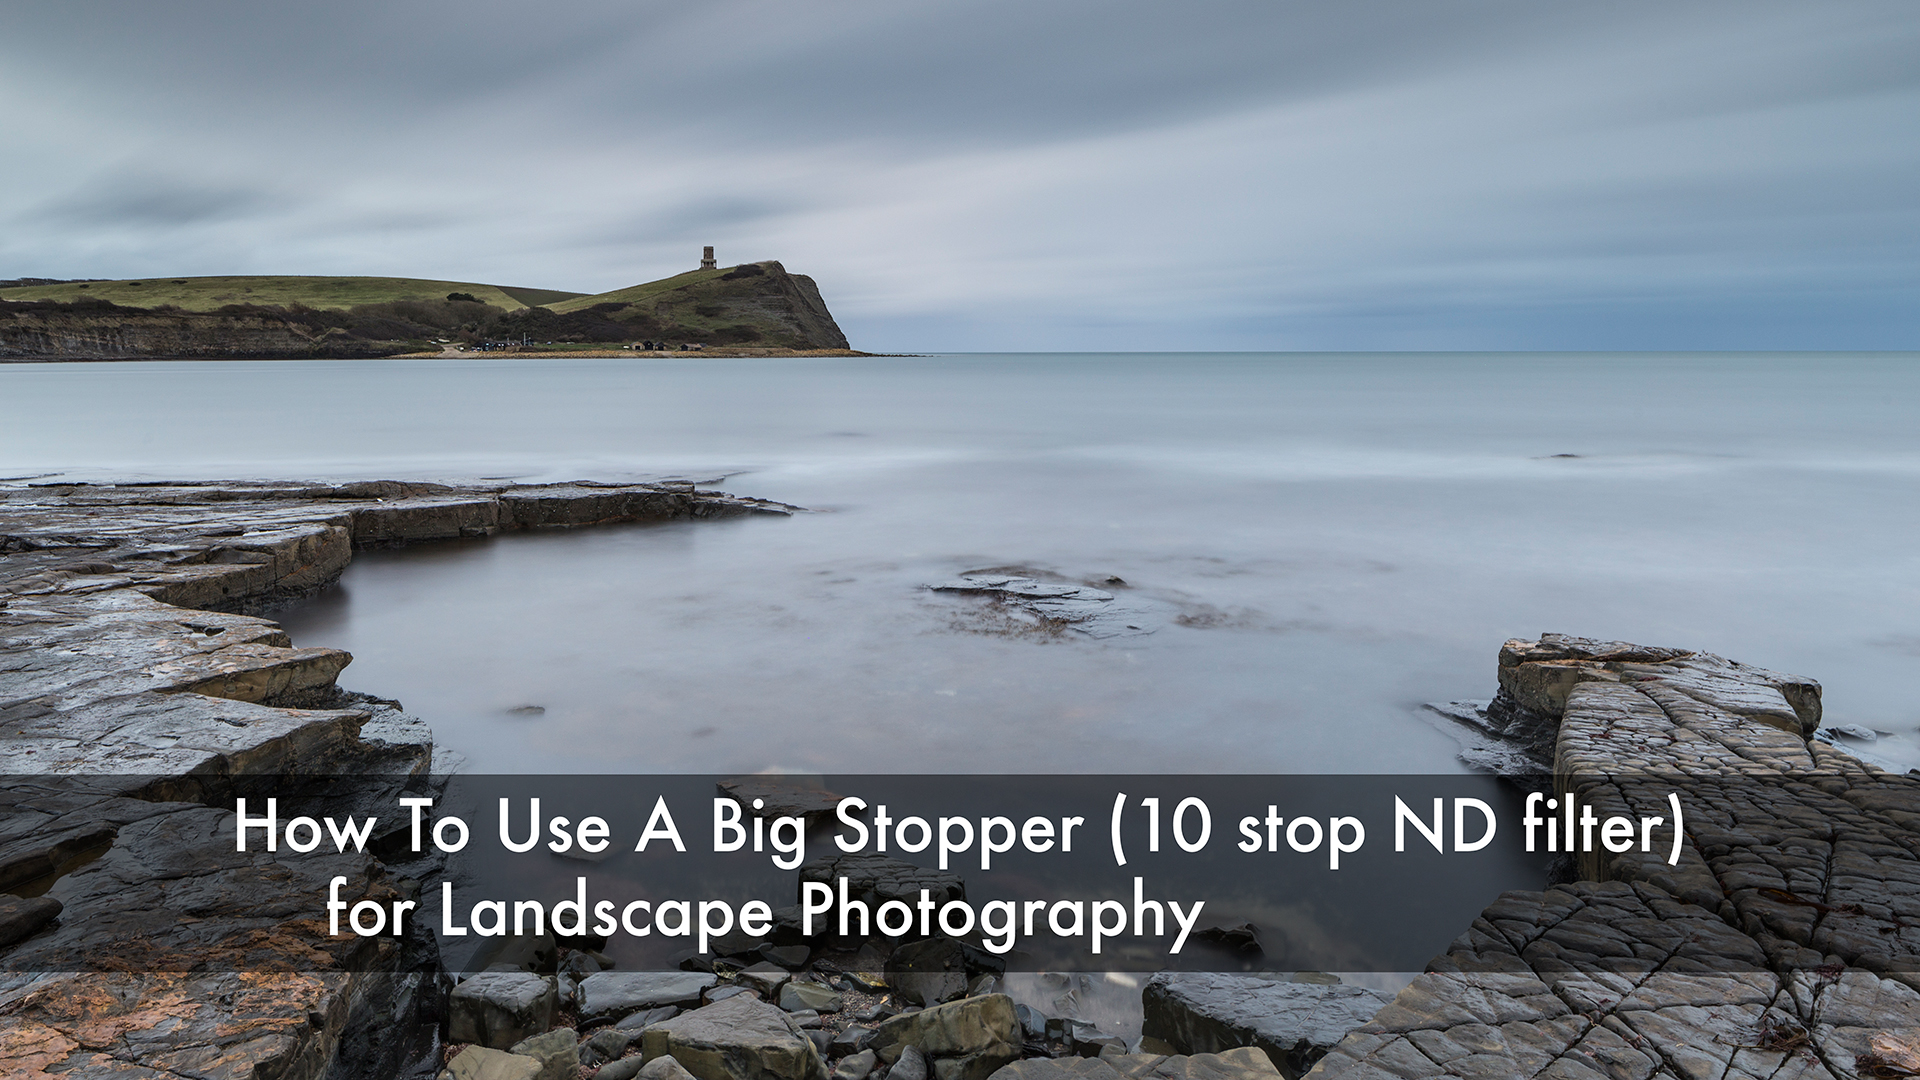 How To Use A Big Stopper (10 stop ND filter) for Landscape Photography